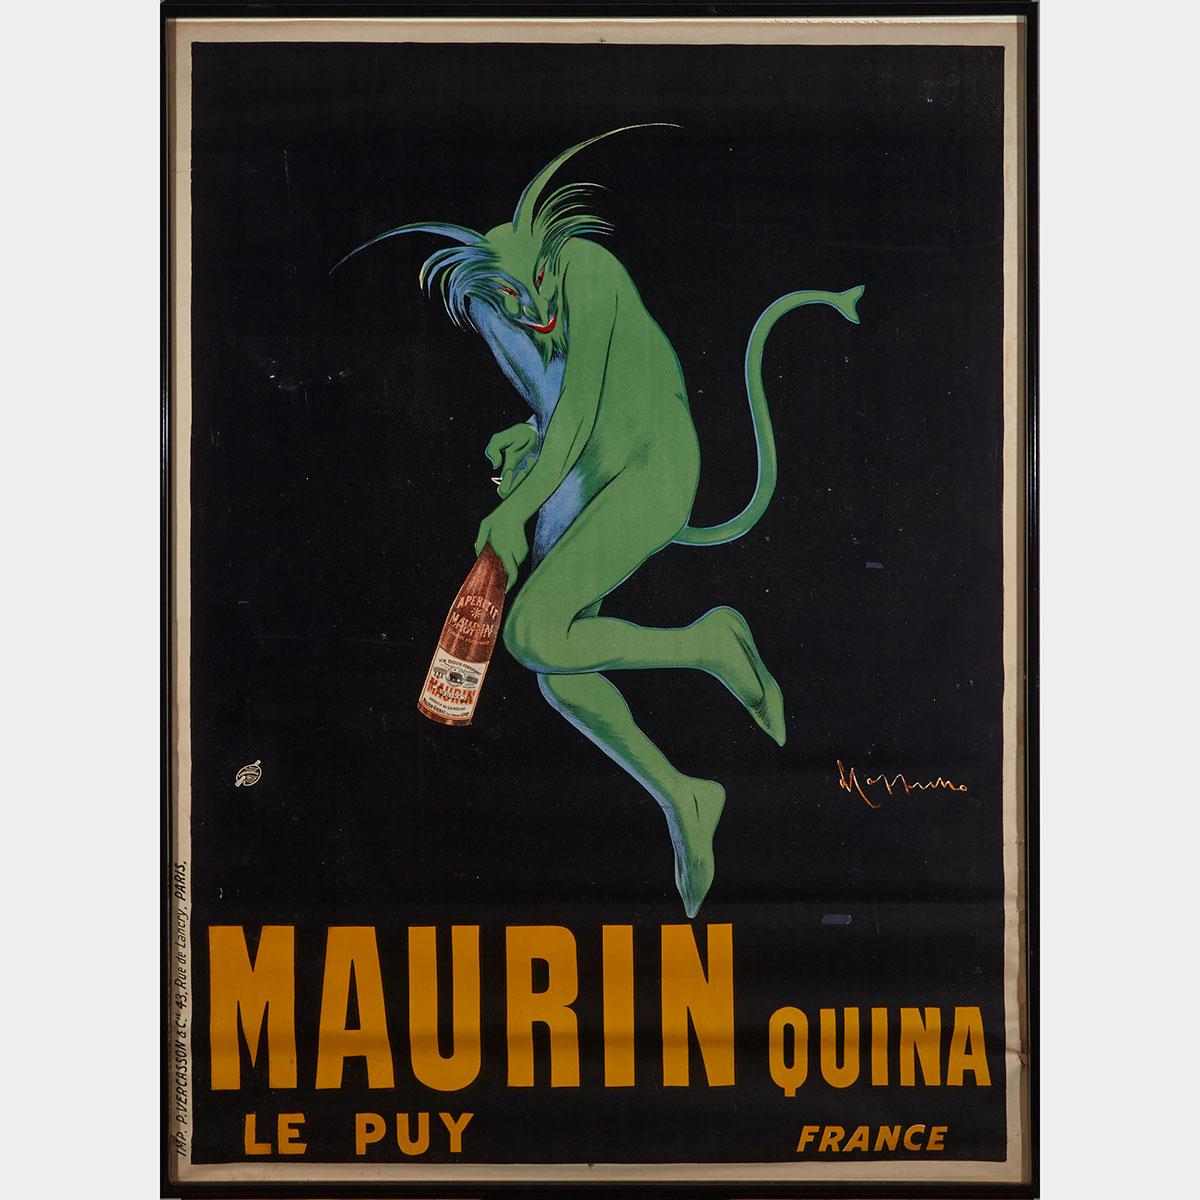 French Chromolithograph Advertising Poster, early 20th century